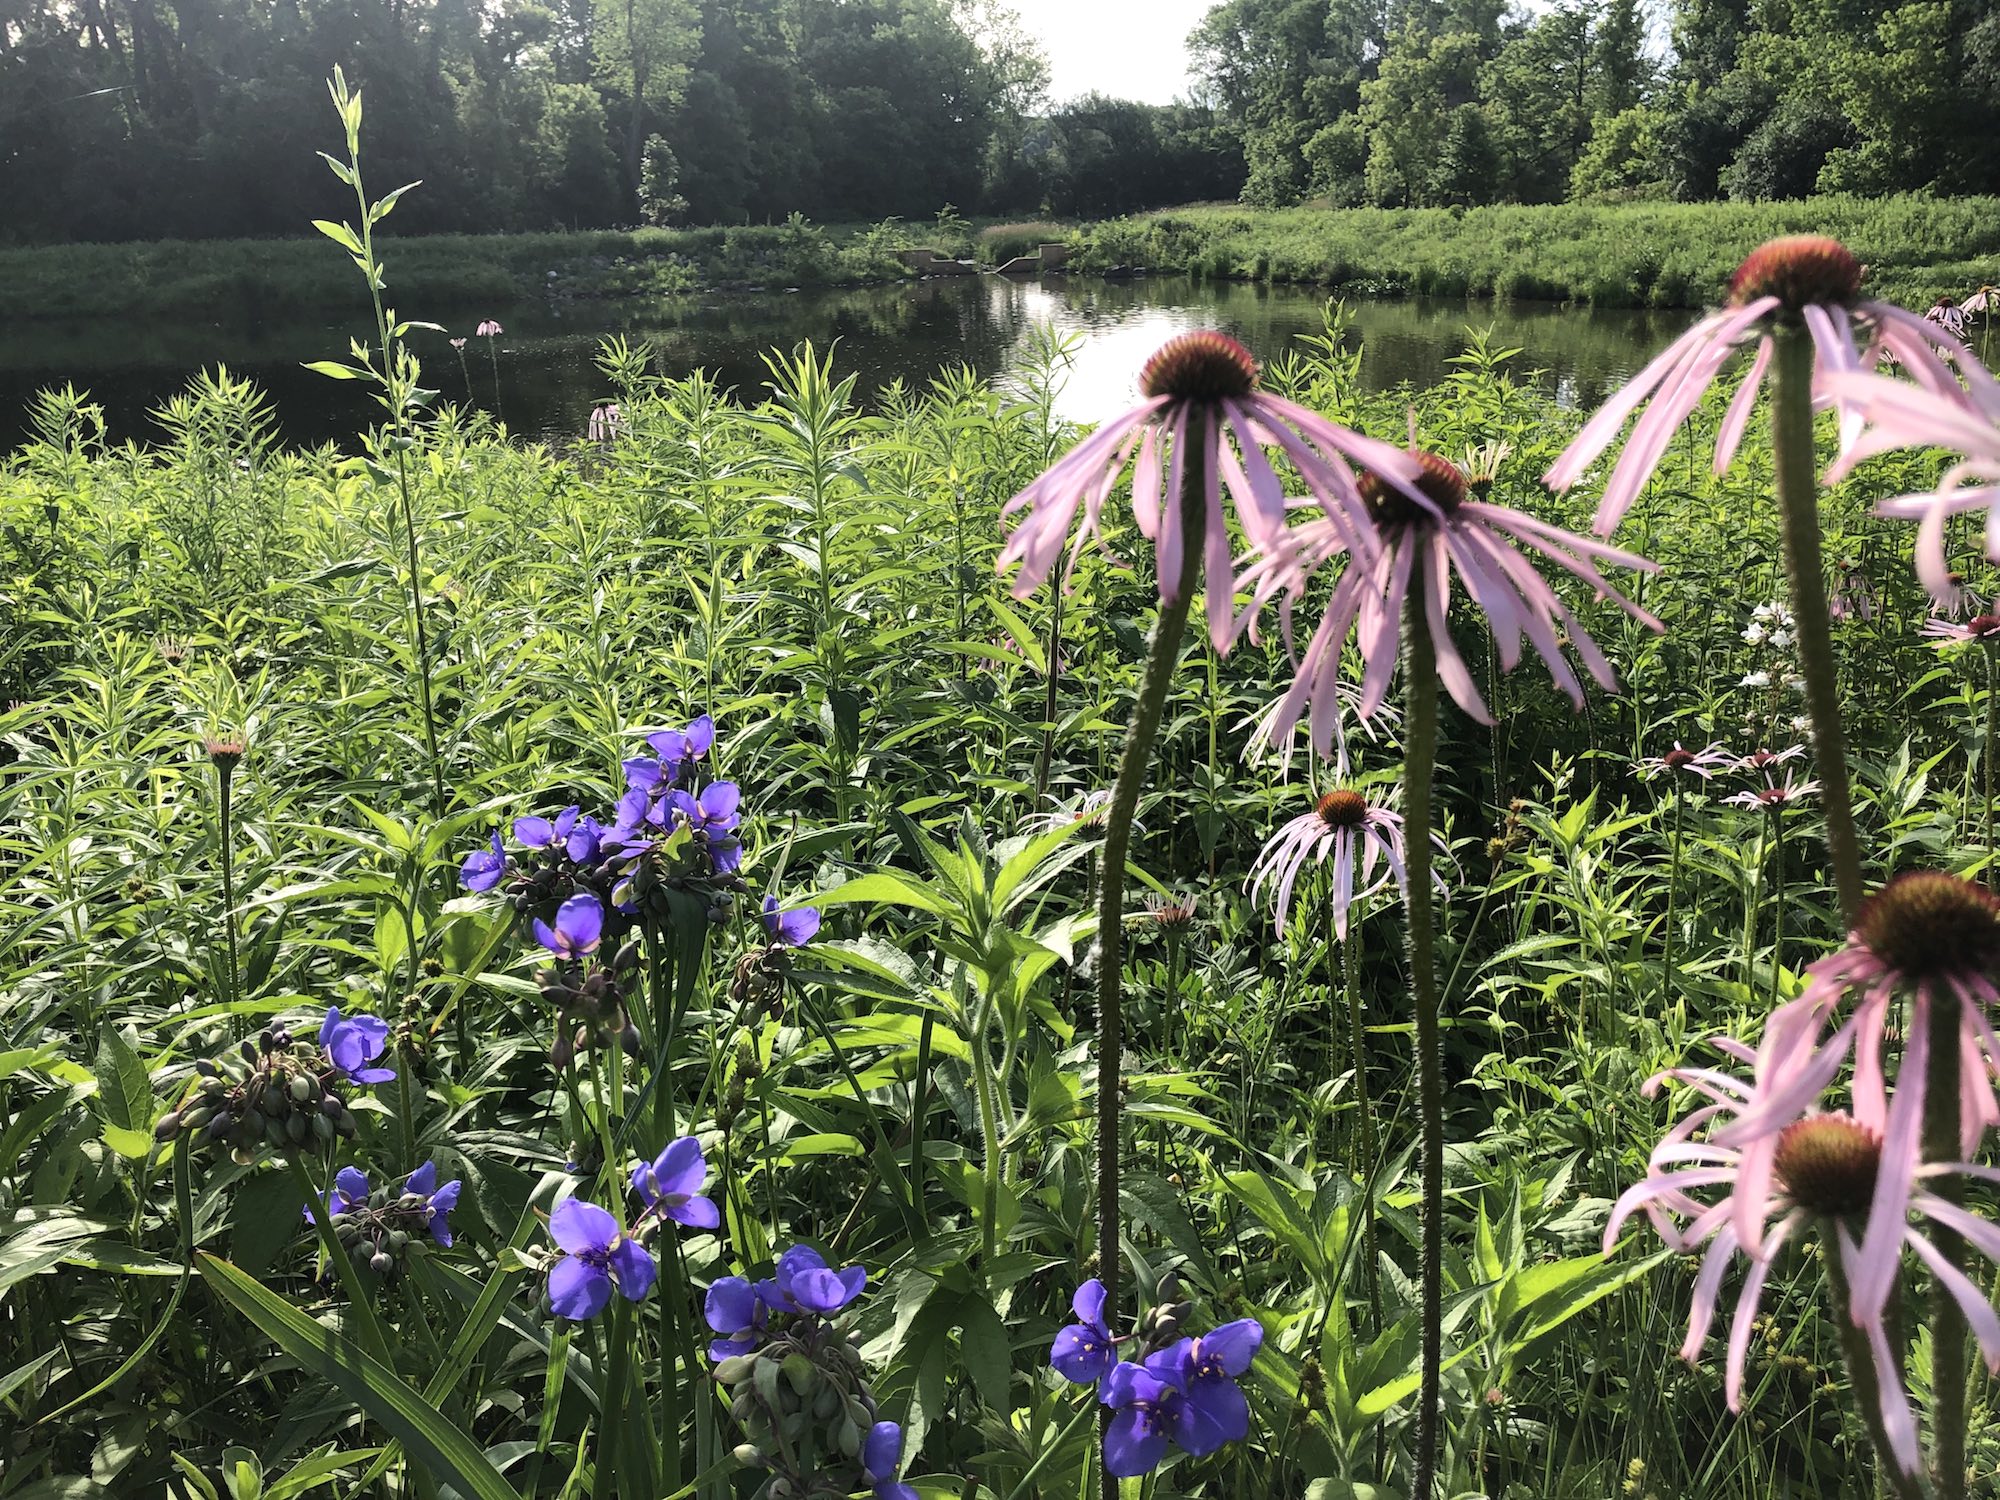 Pale purple coneflower on bank of Retaining Pond on corner of Nakoma Road and Manitou Way on June 26, 2019.